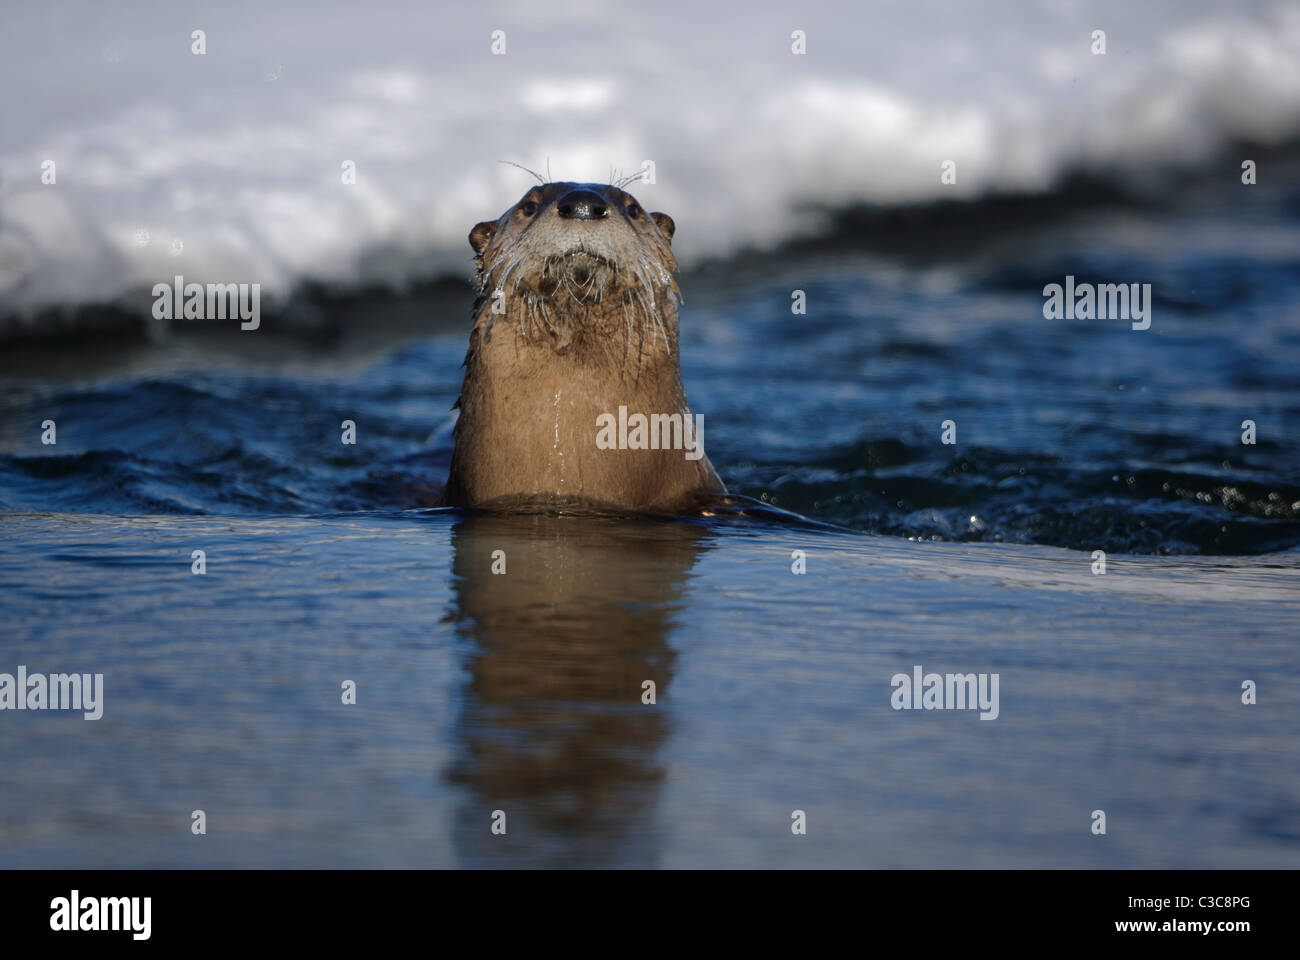 Northern River Otter (Lontra canadensis) poking her head out of the water, Wyoming Stock Photo